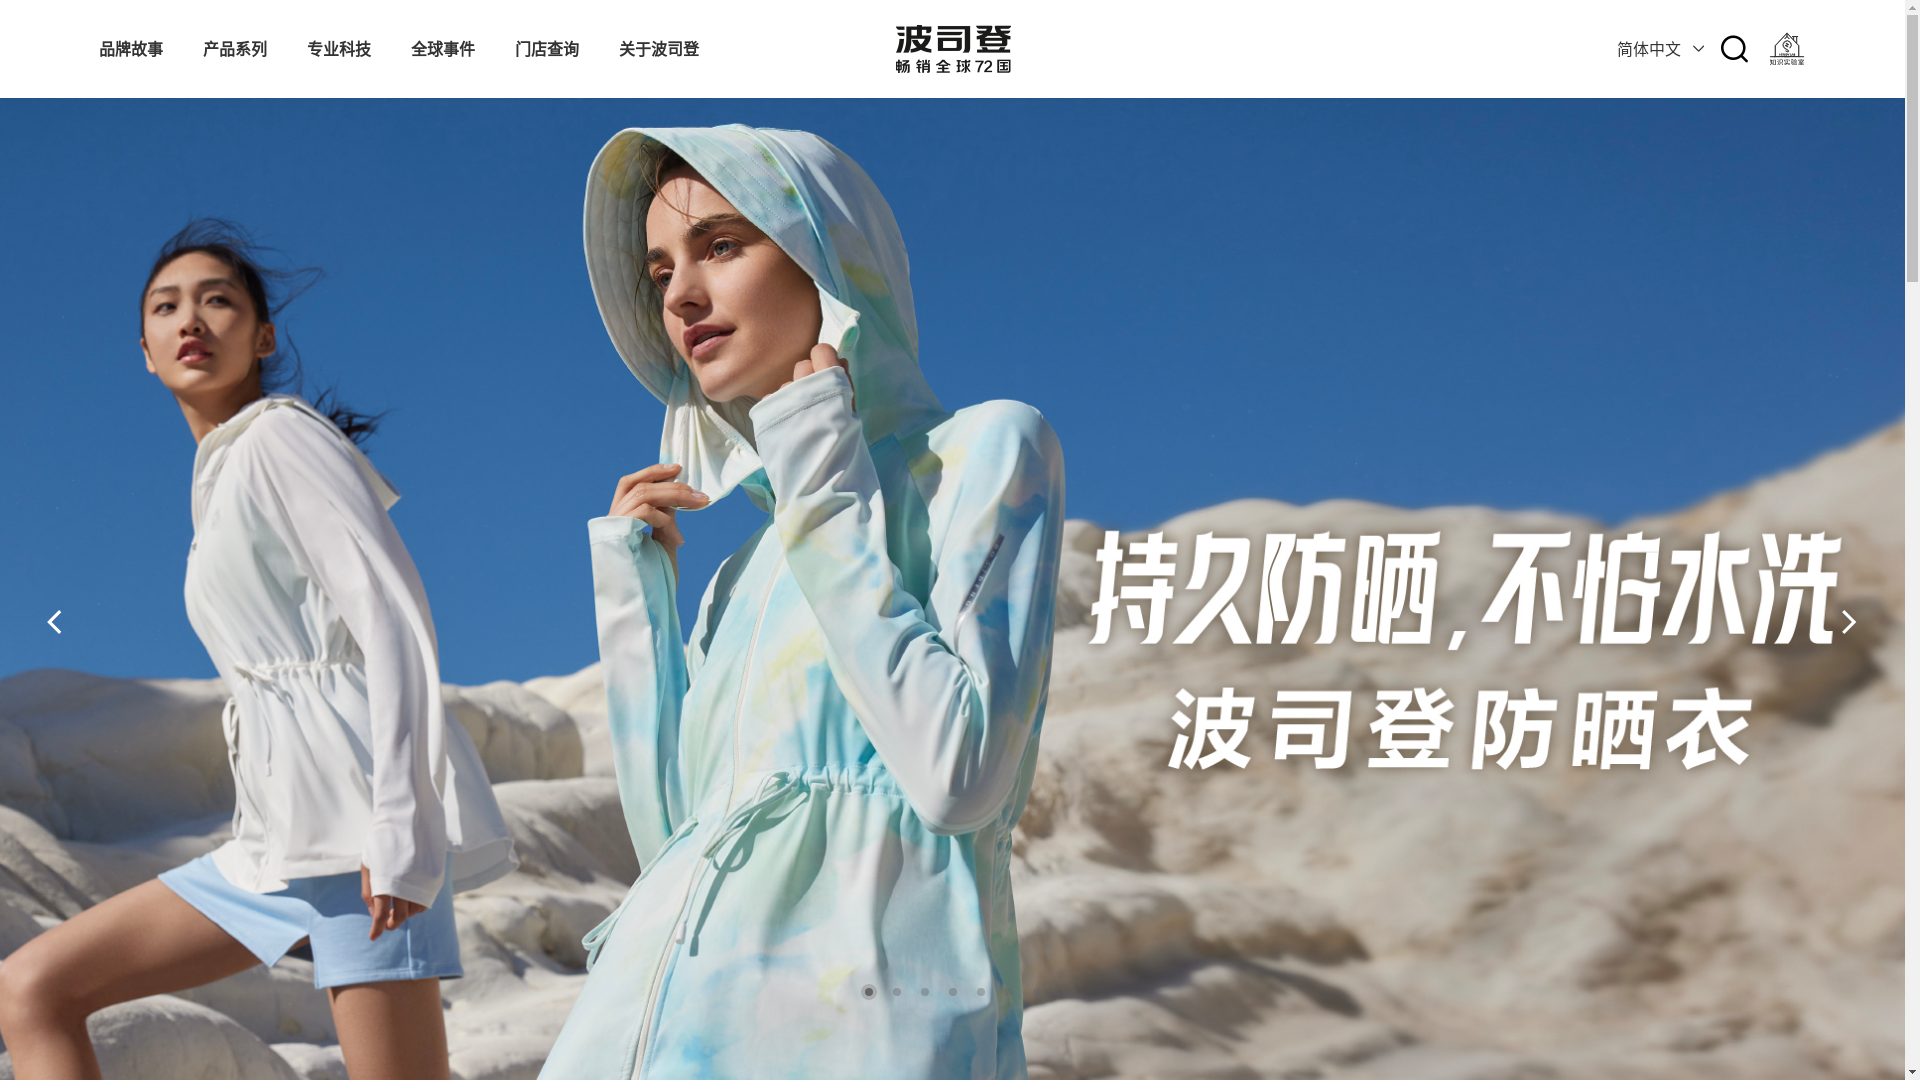 Top 10 Most Popular Chinese Warm Clothing Brands